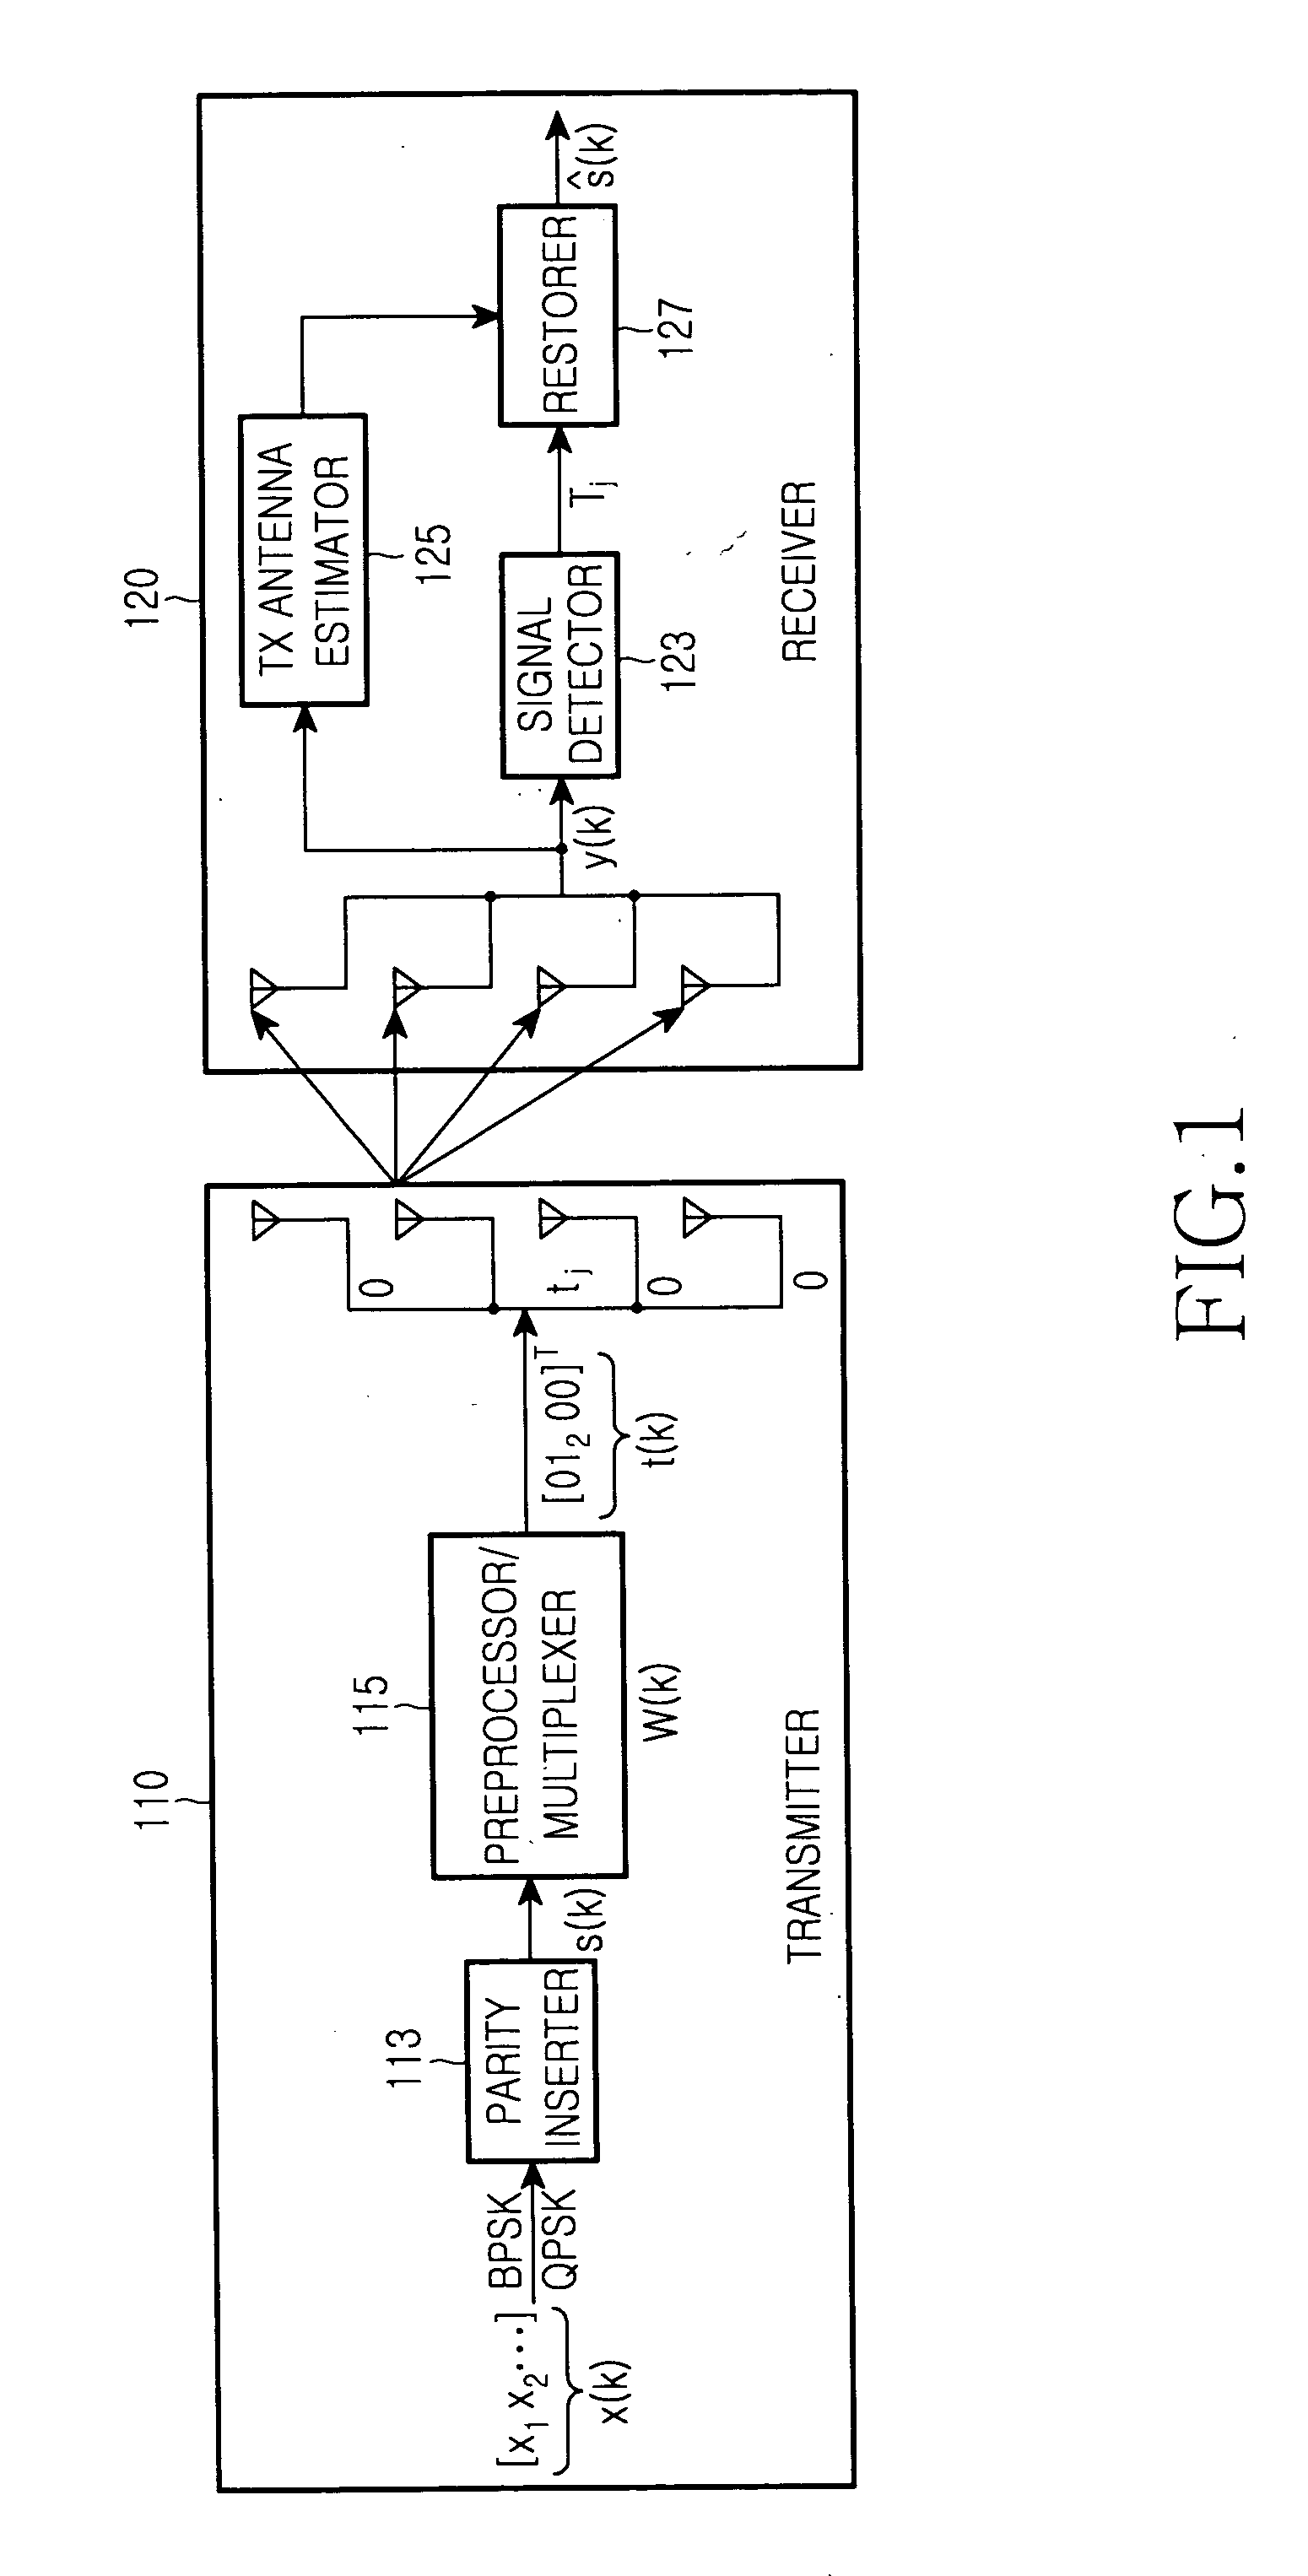 Method for transmitting data in a MIMO communication system